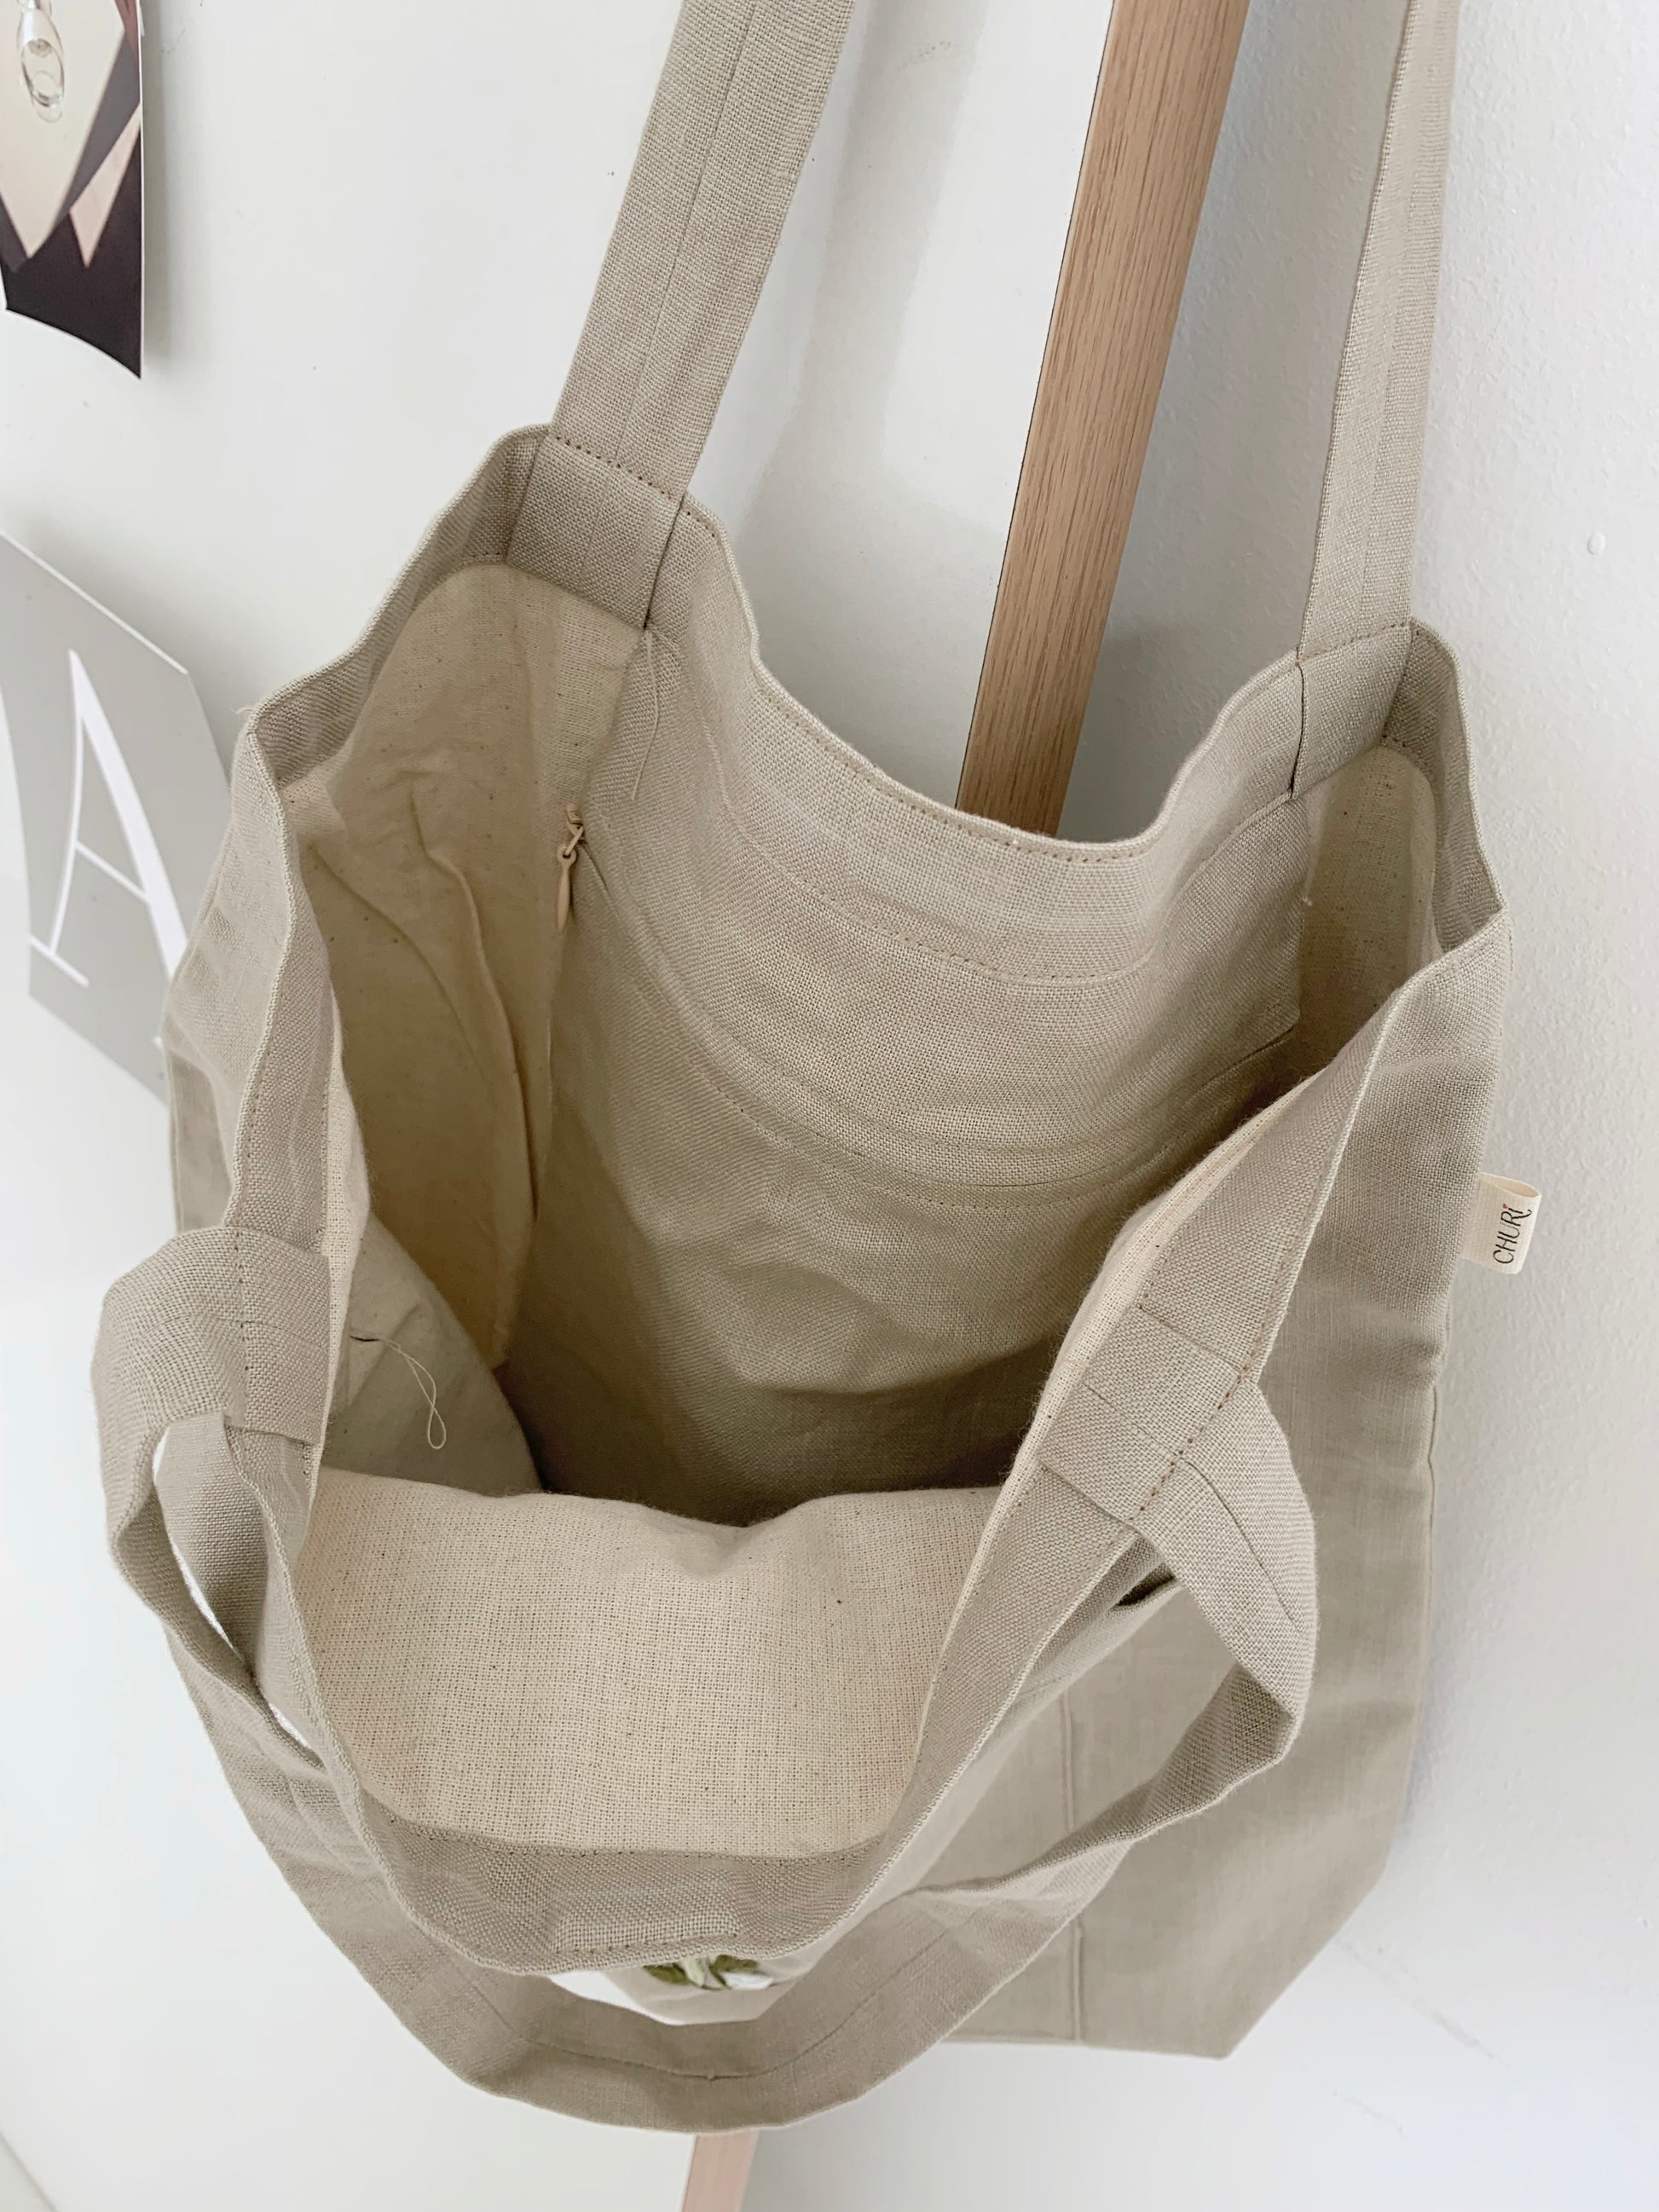 Linen Canvas Tote Bag with Hand Embroidery Leaf